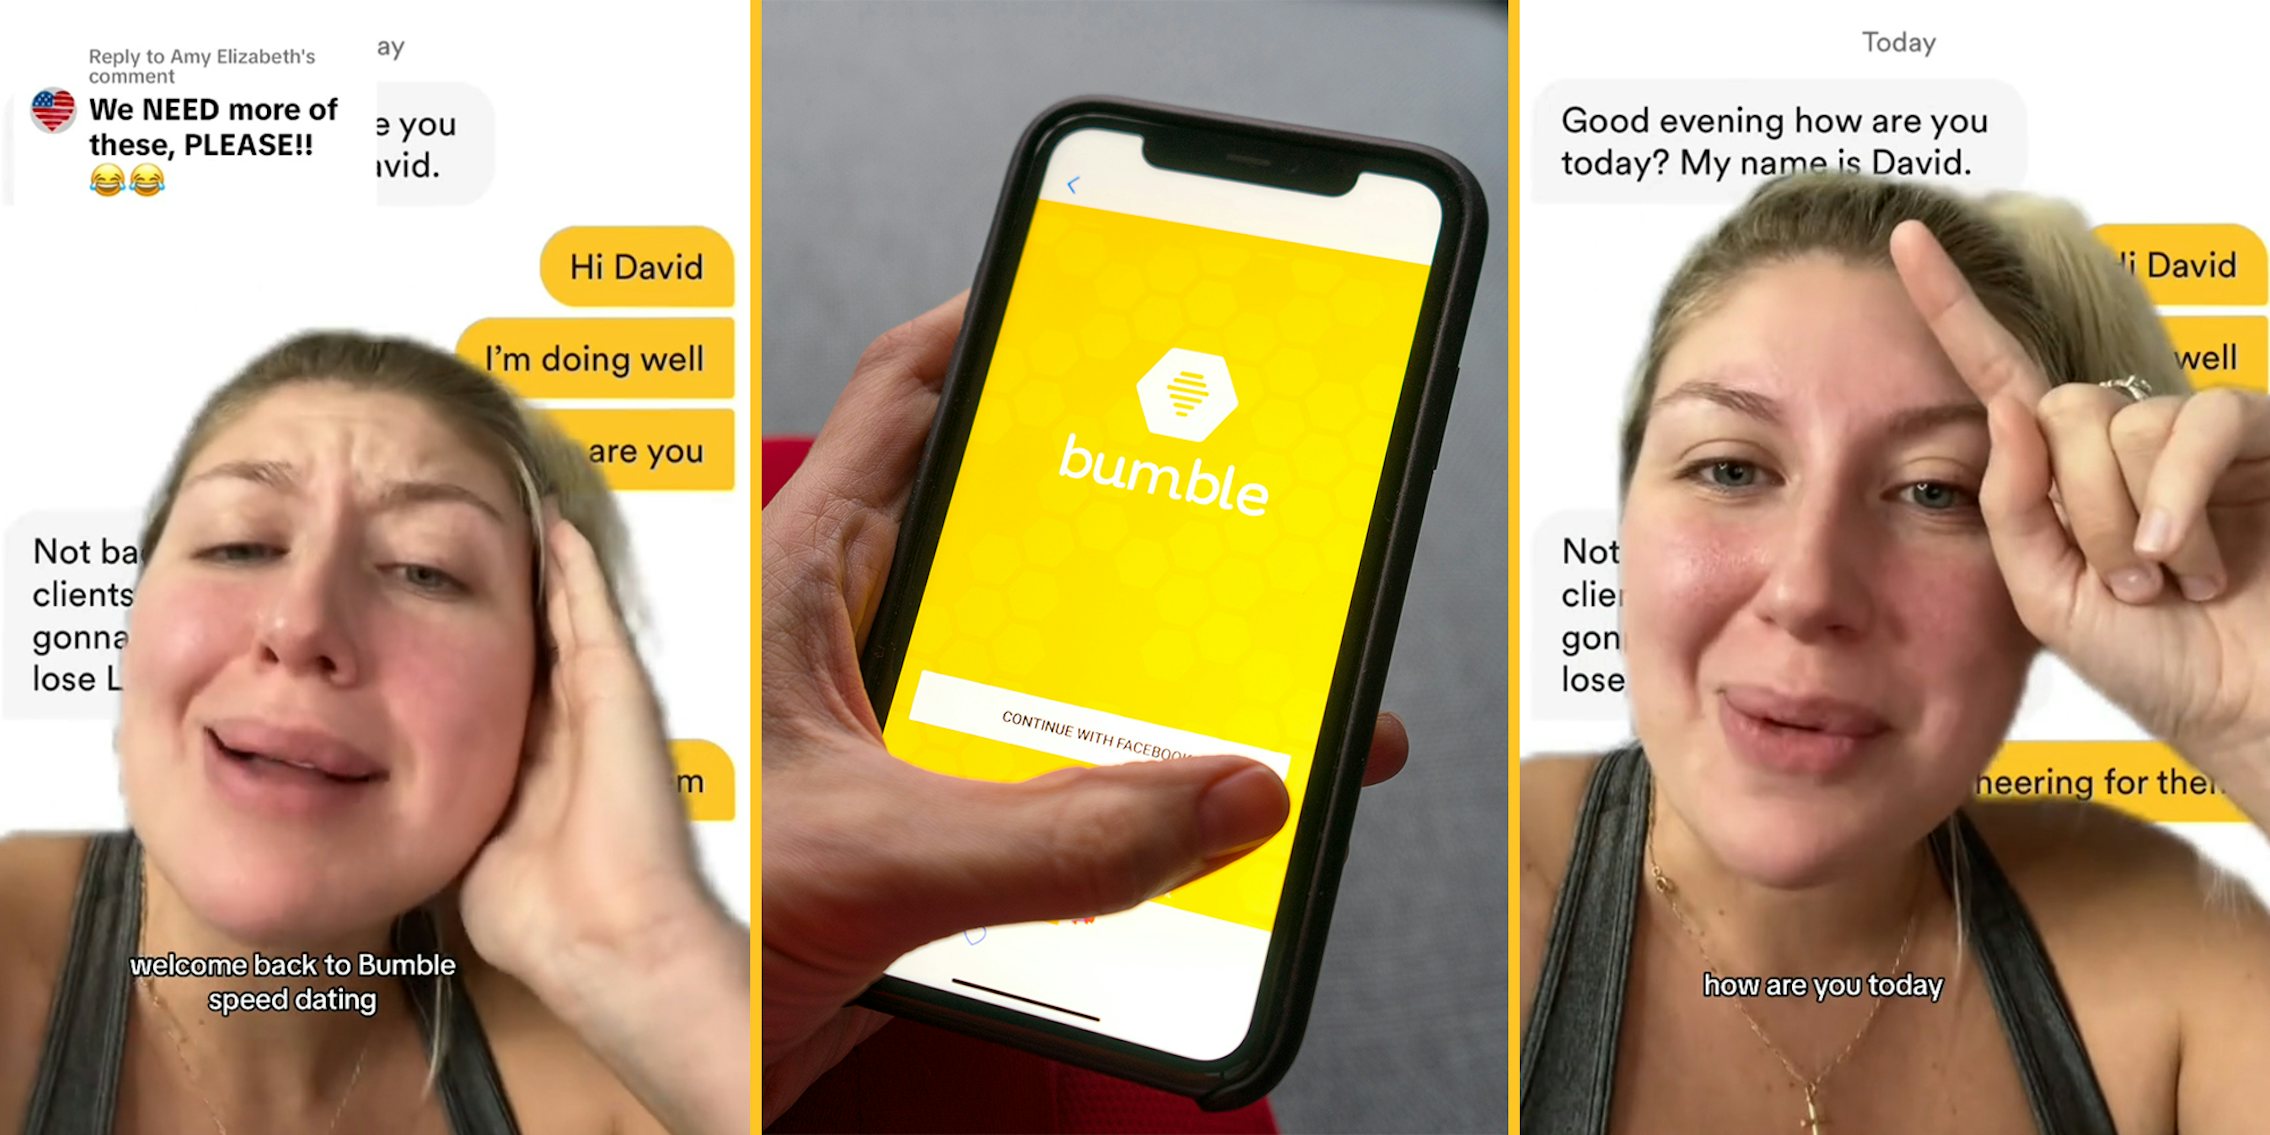 Hand holding a smartphone with a Bumble dating icon on screen.